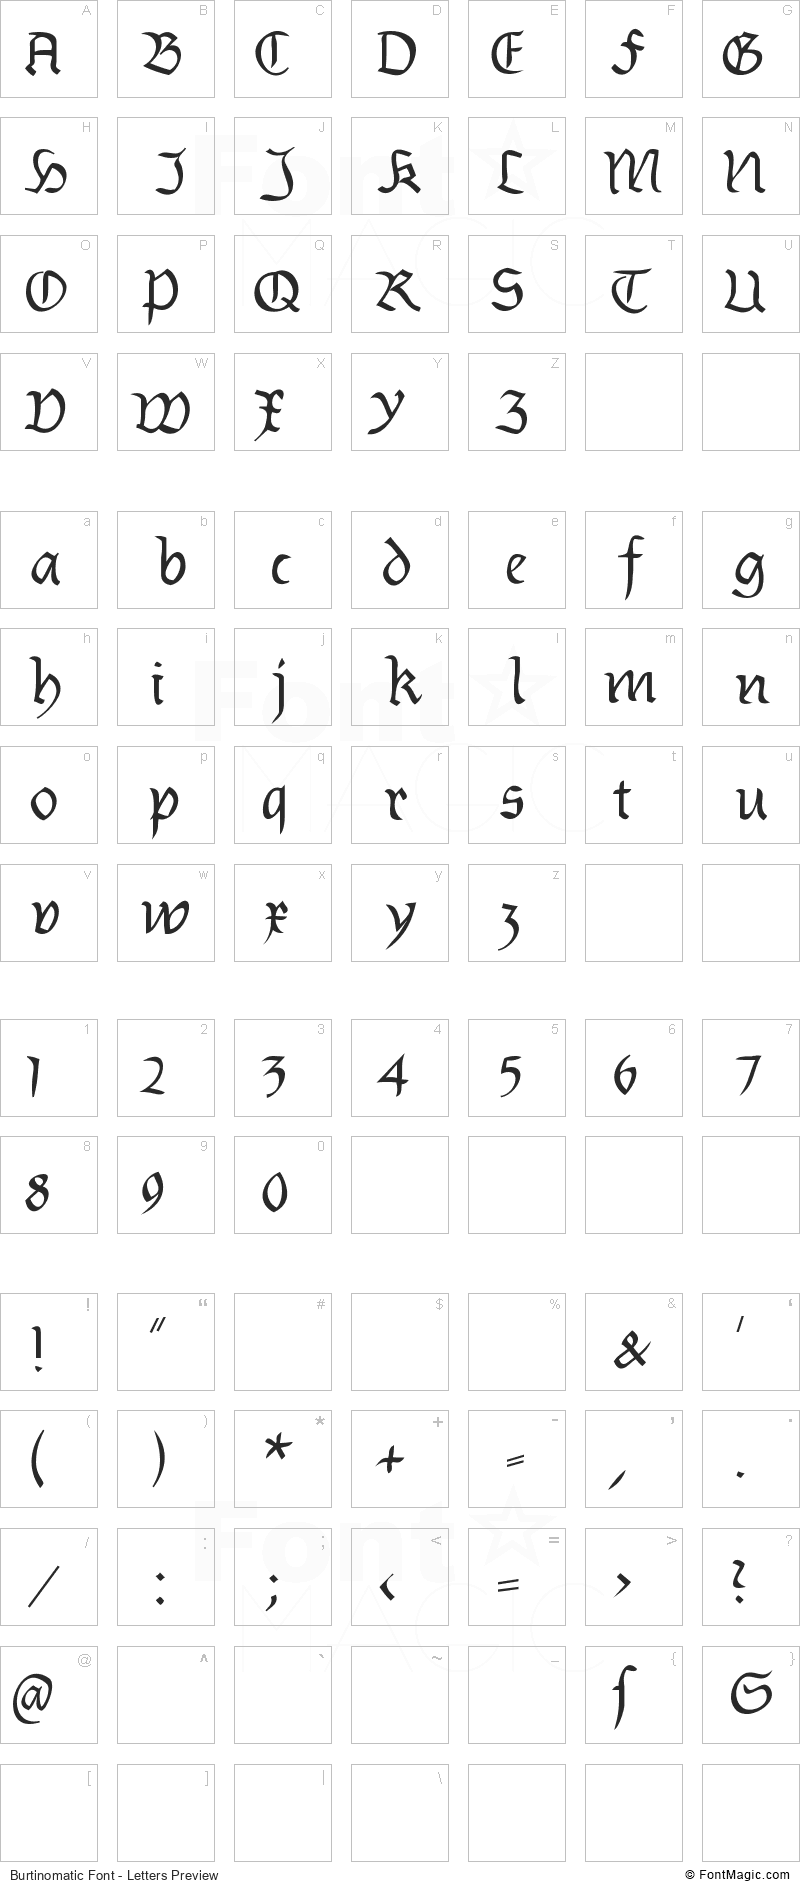 Burtinomatic Font - All Latters Preview Chart